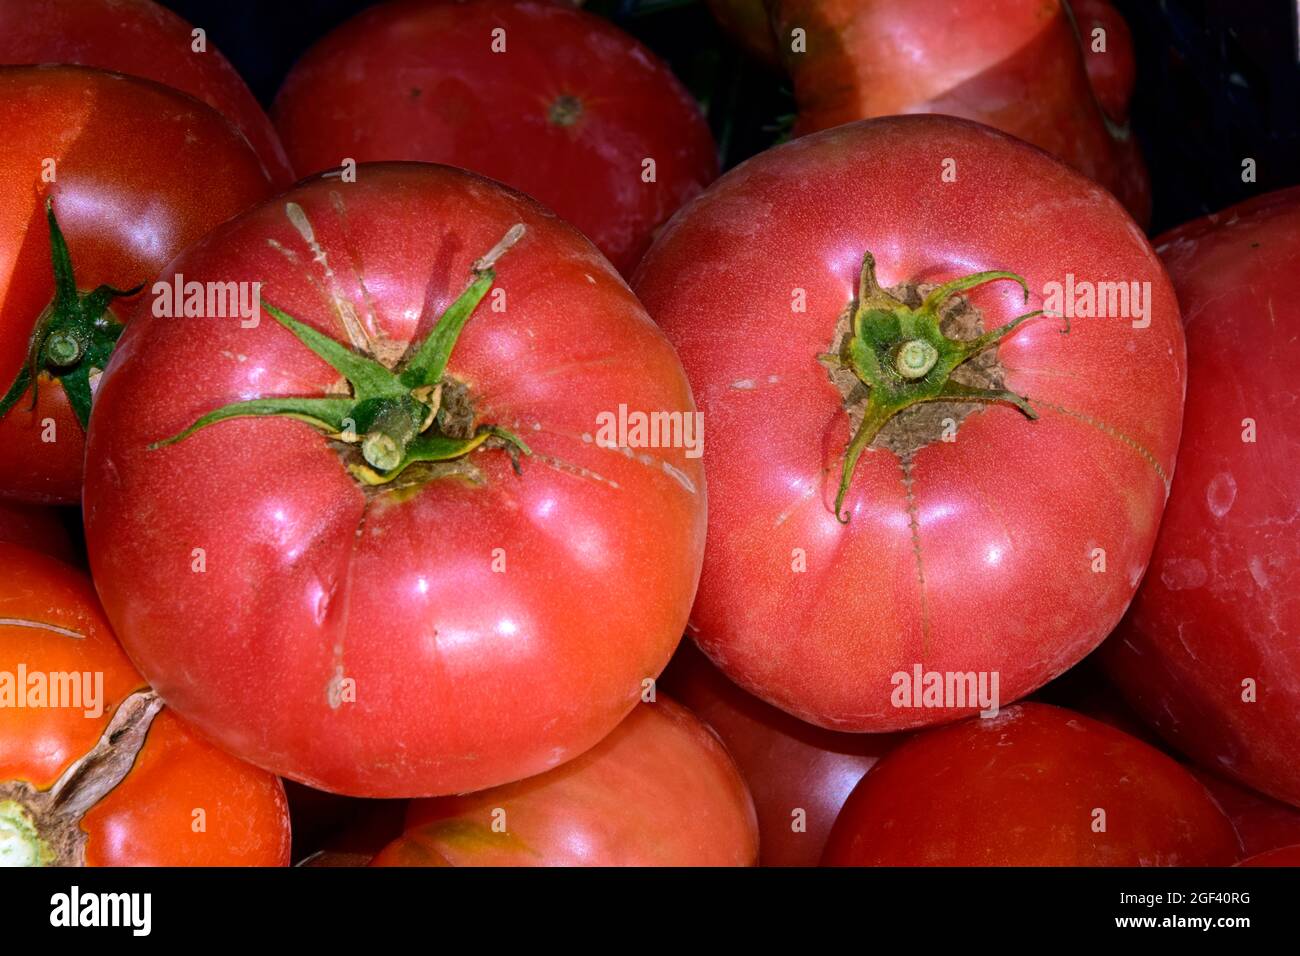 Top down closeup view on two ripe, red tomatoes with green stalks placed among many others in bright sunshine. Stock Photo